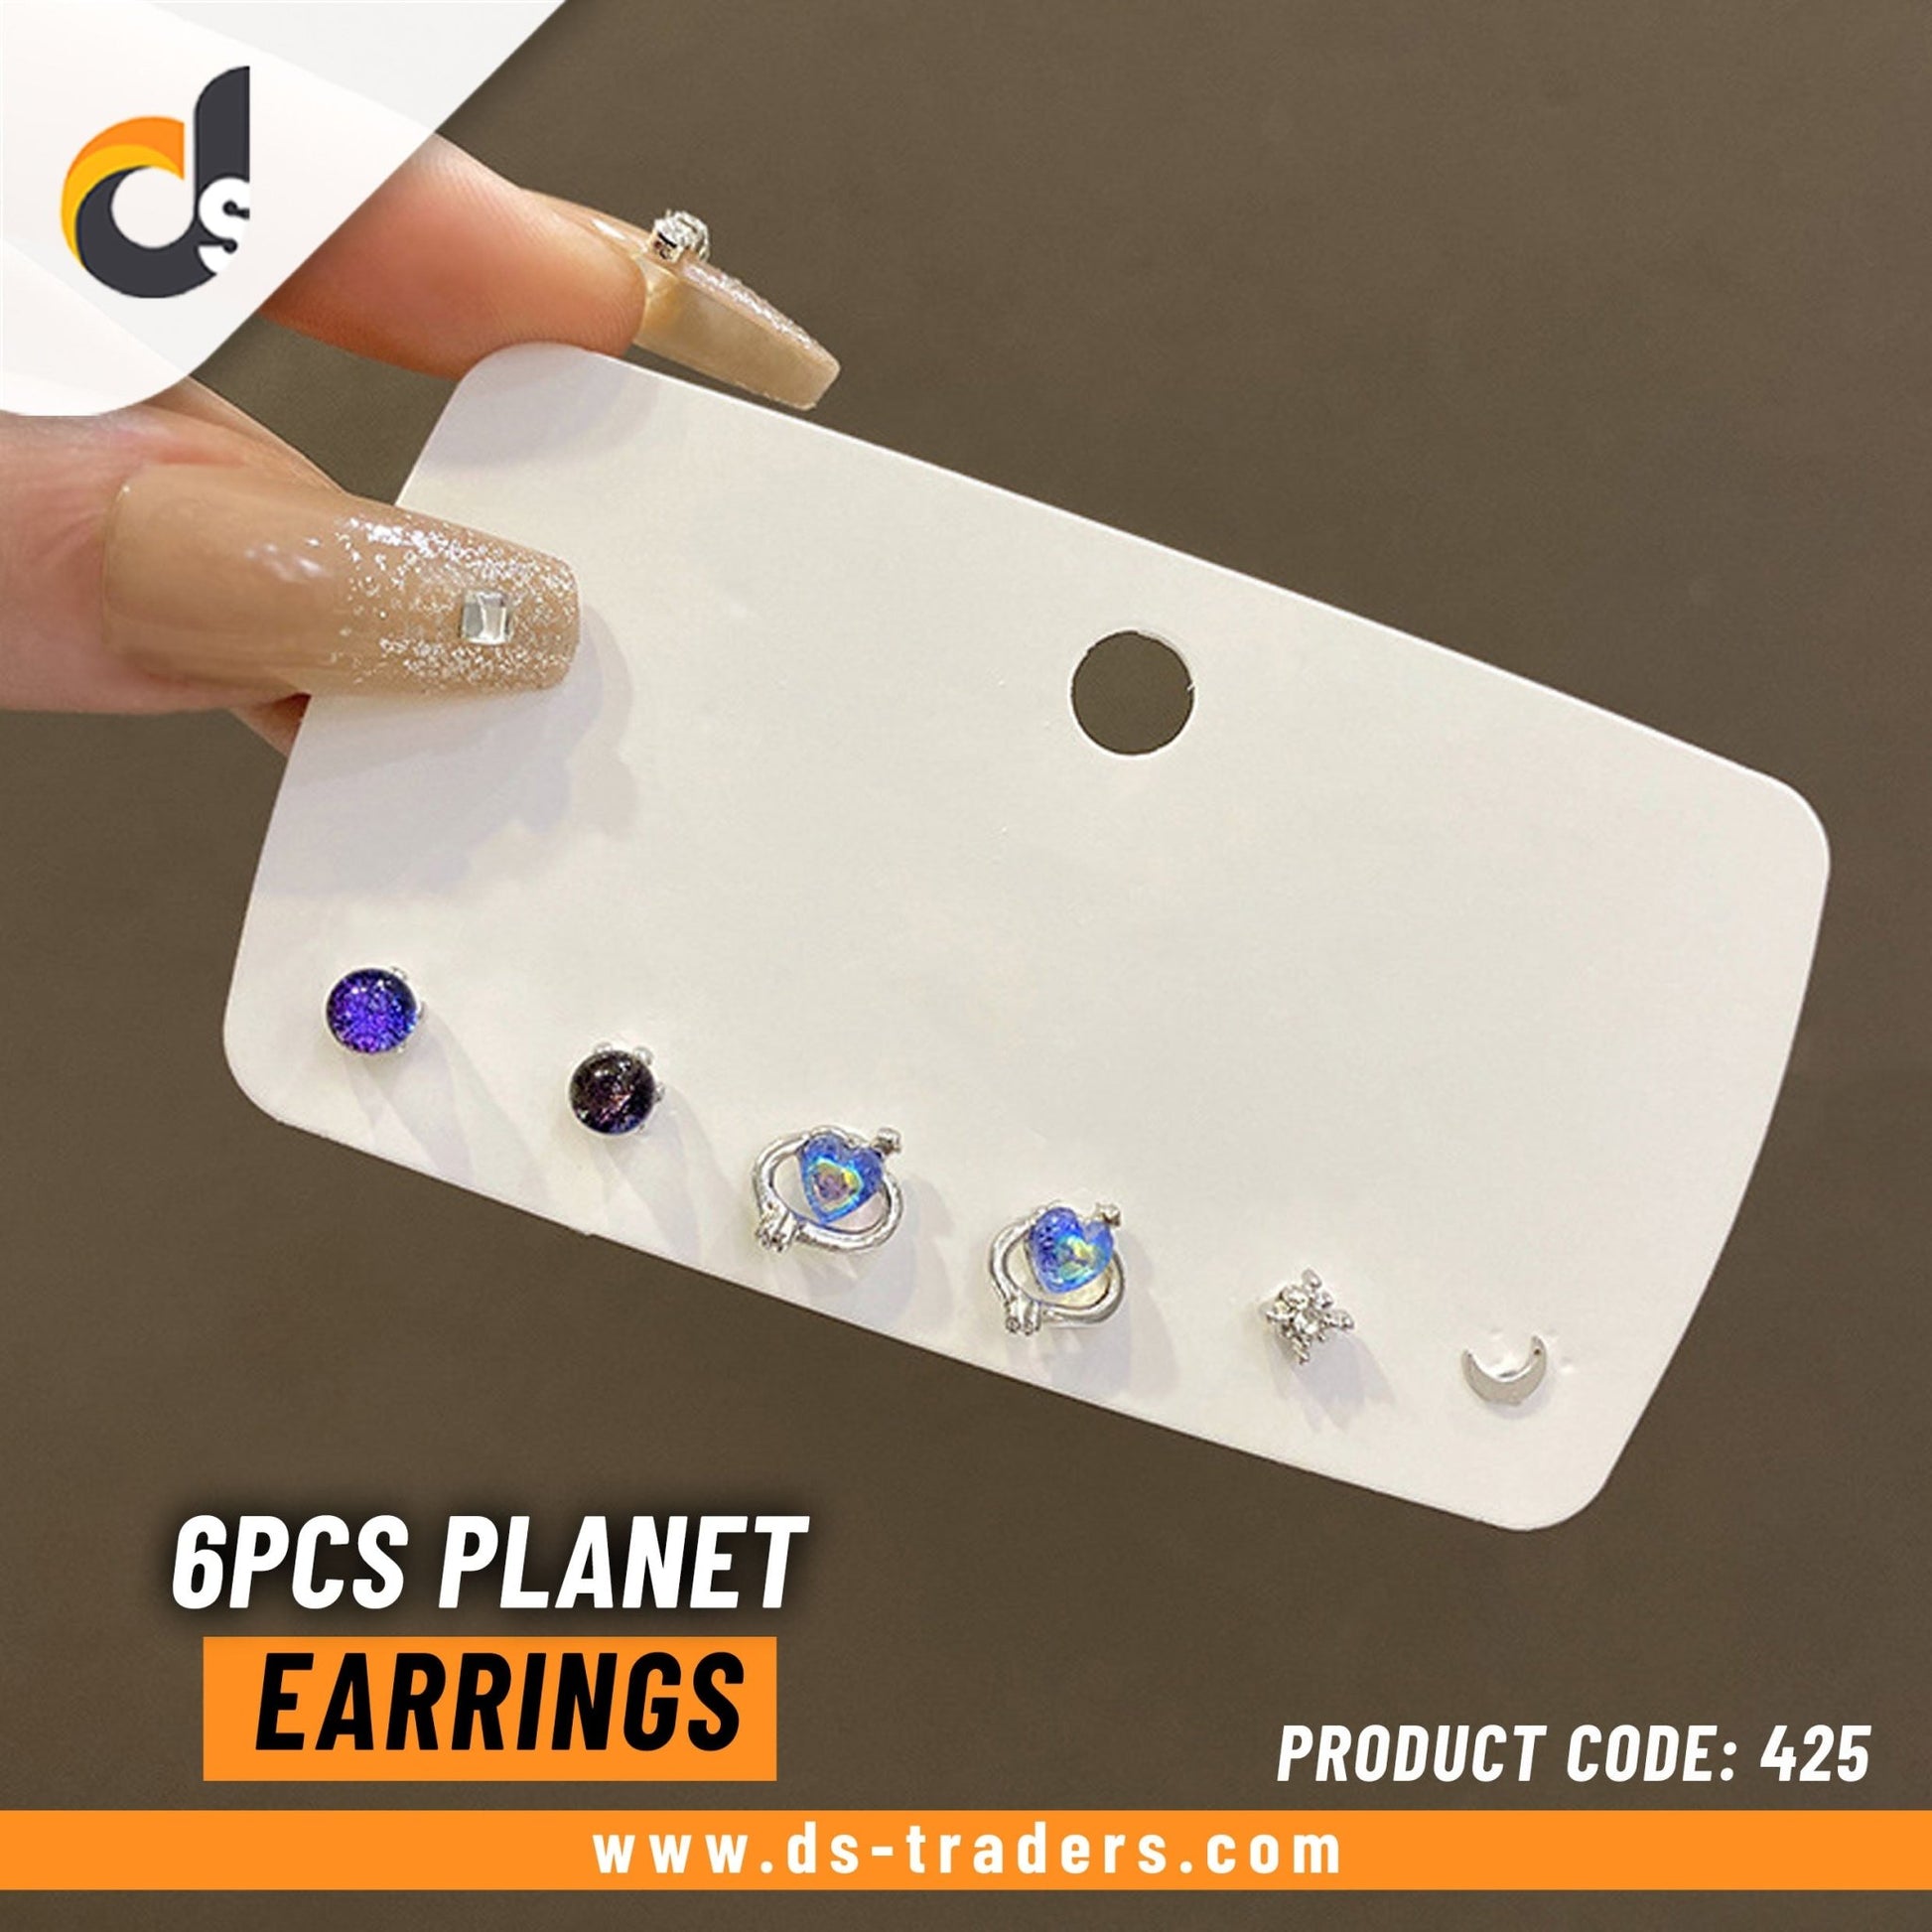 6Pcs Shiny Planet Earrings - DS Traders